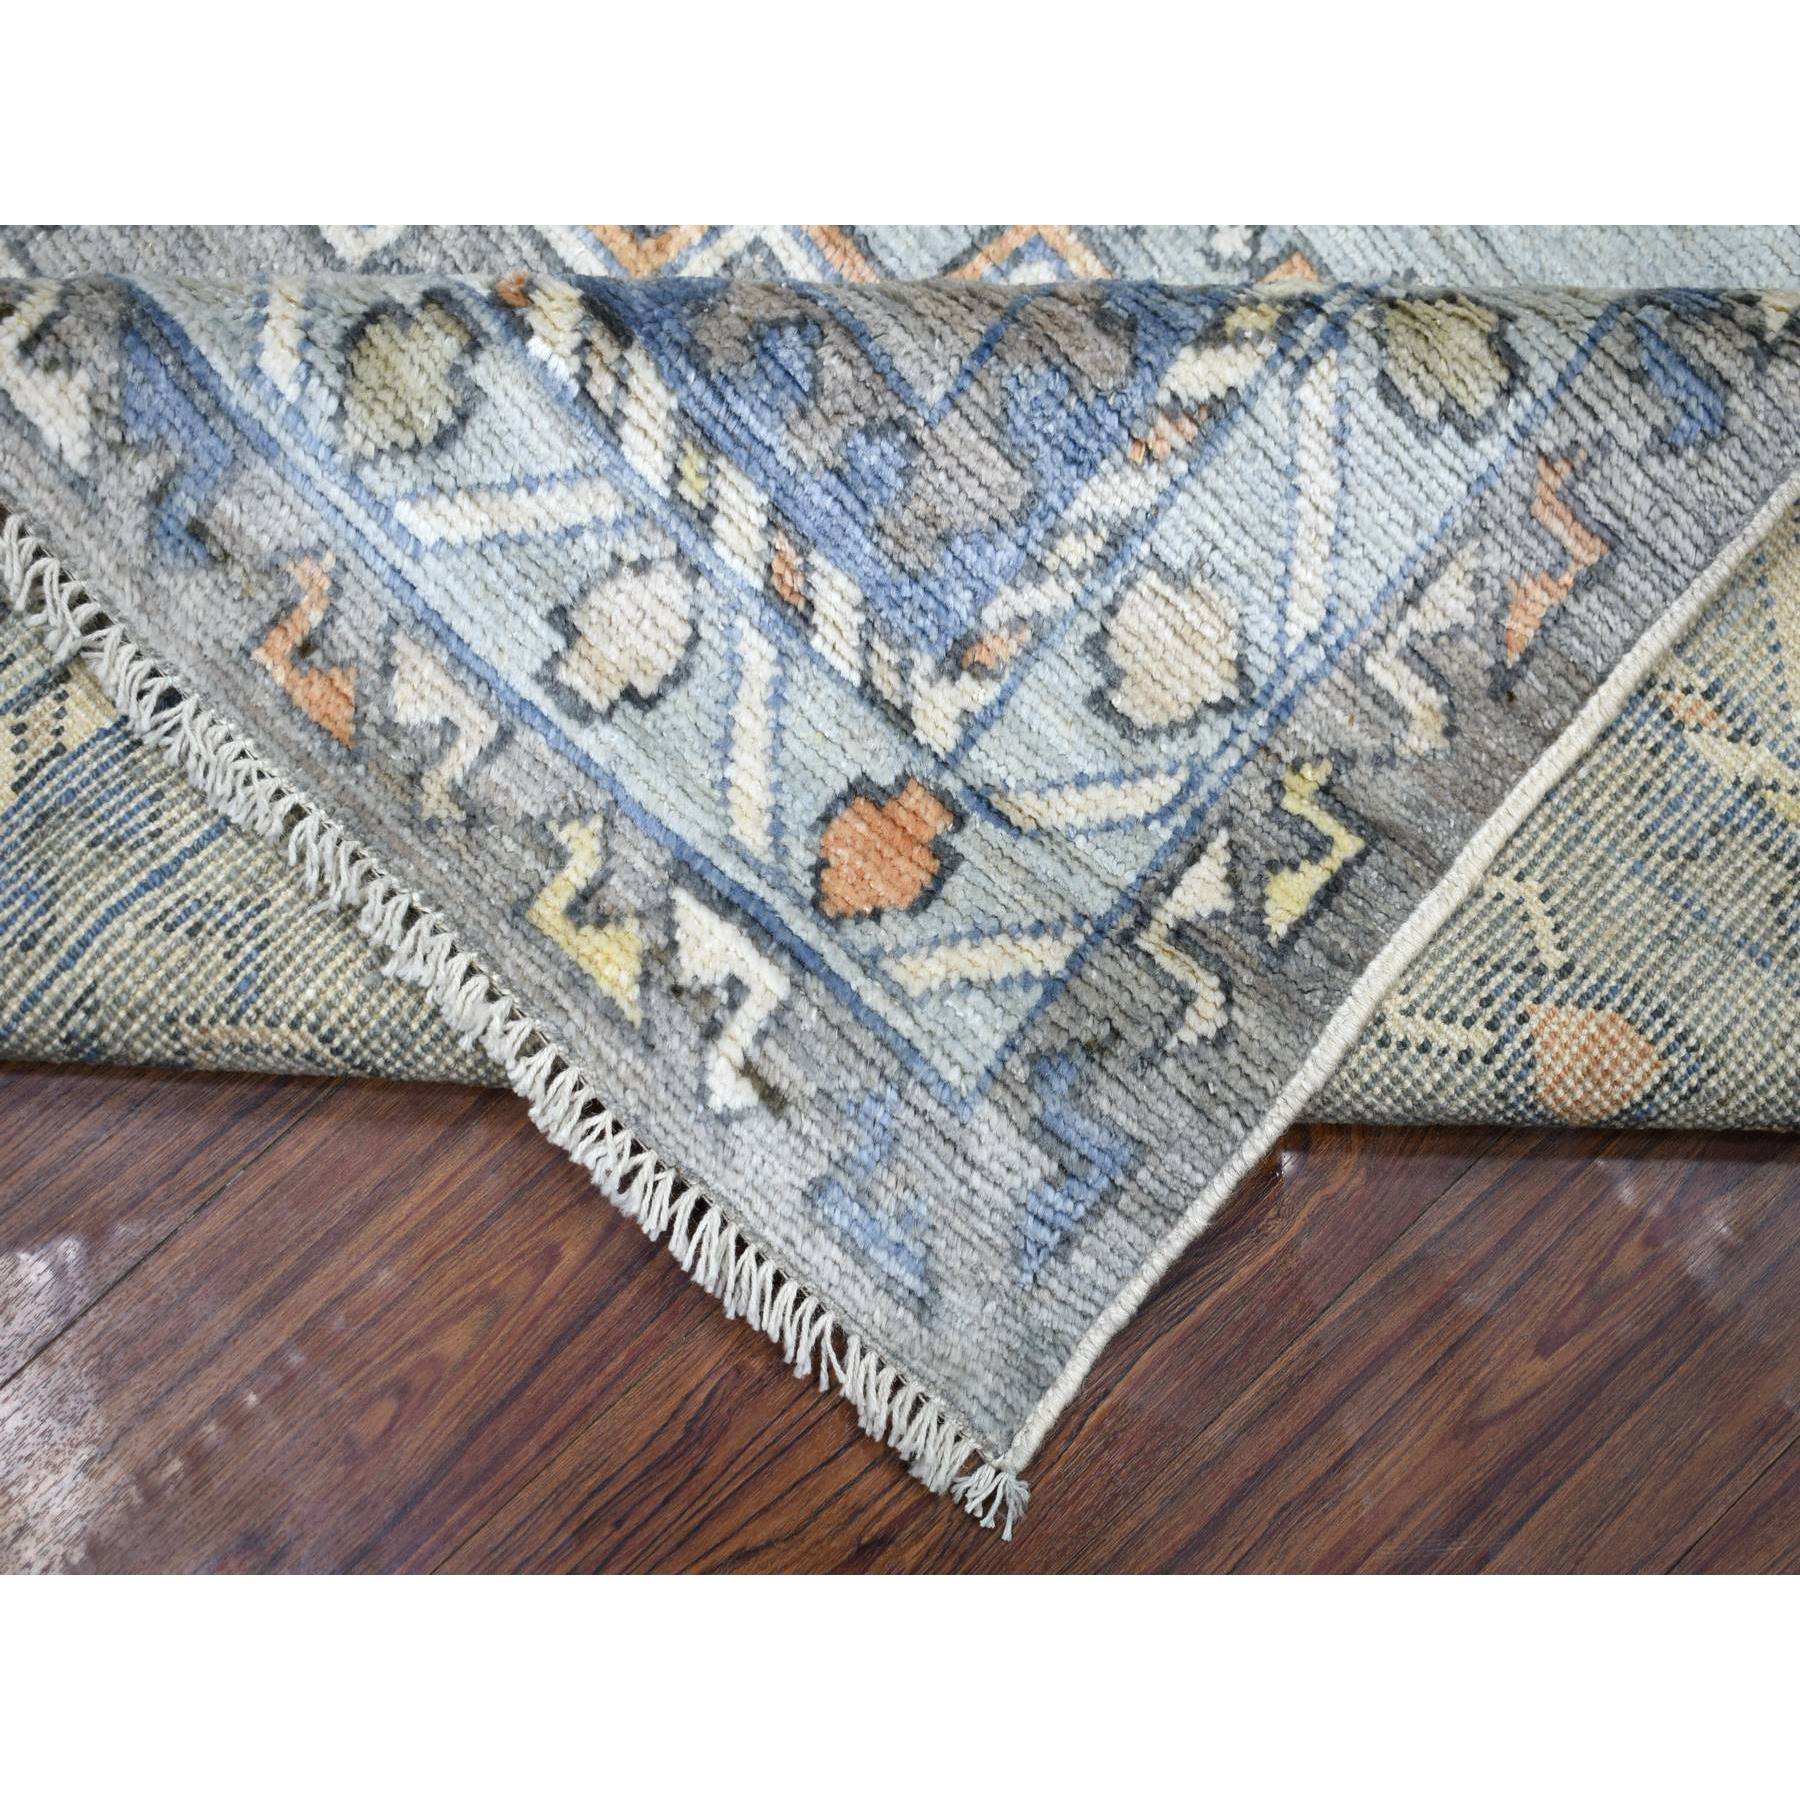 8'x9'10" Light Gray, Anatolian Village Inspired Geometric Design Natural Dyes, Natural Wool Hand Woven, Oriental Rug 